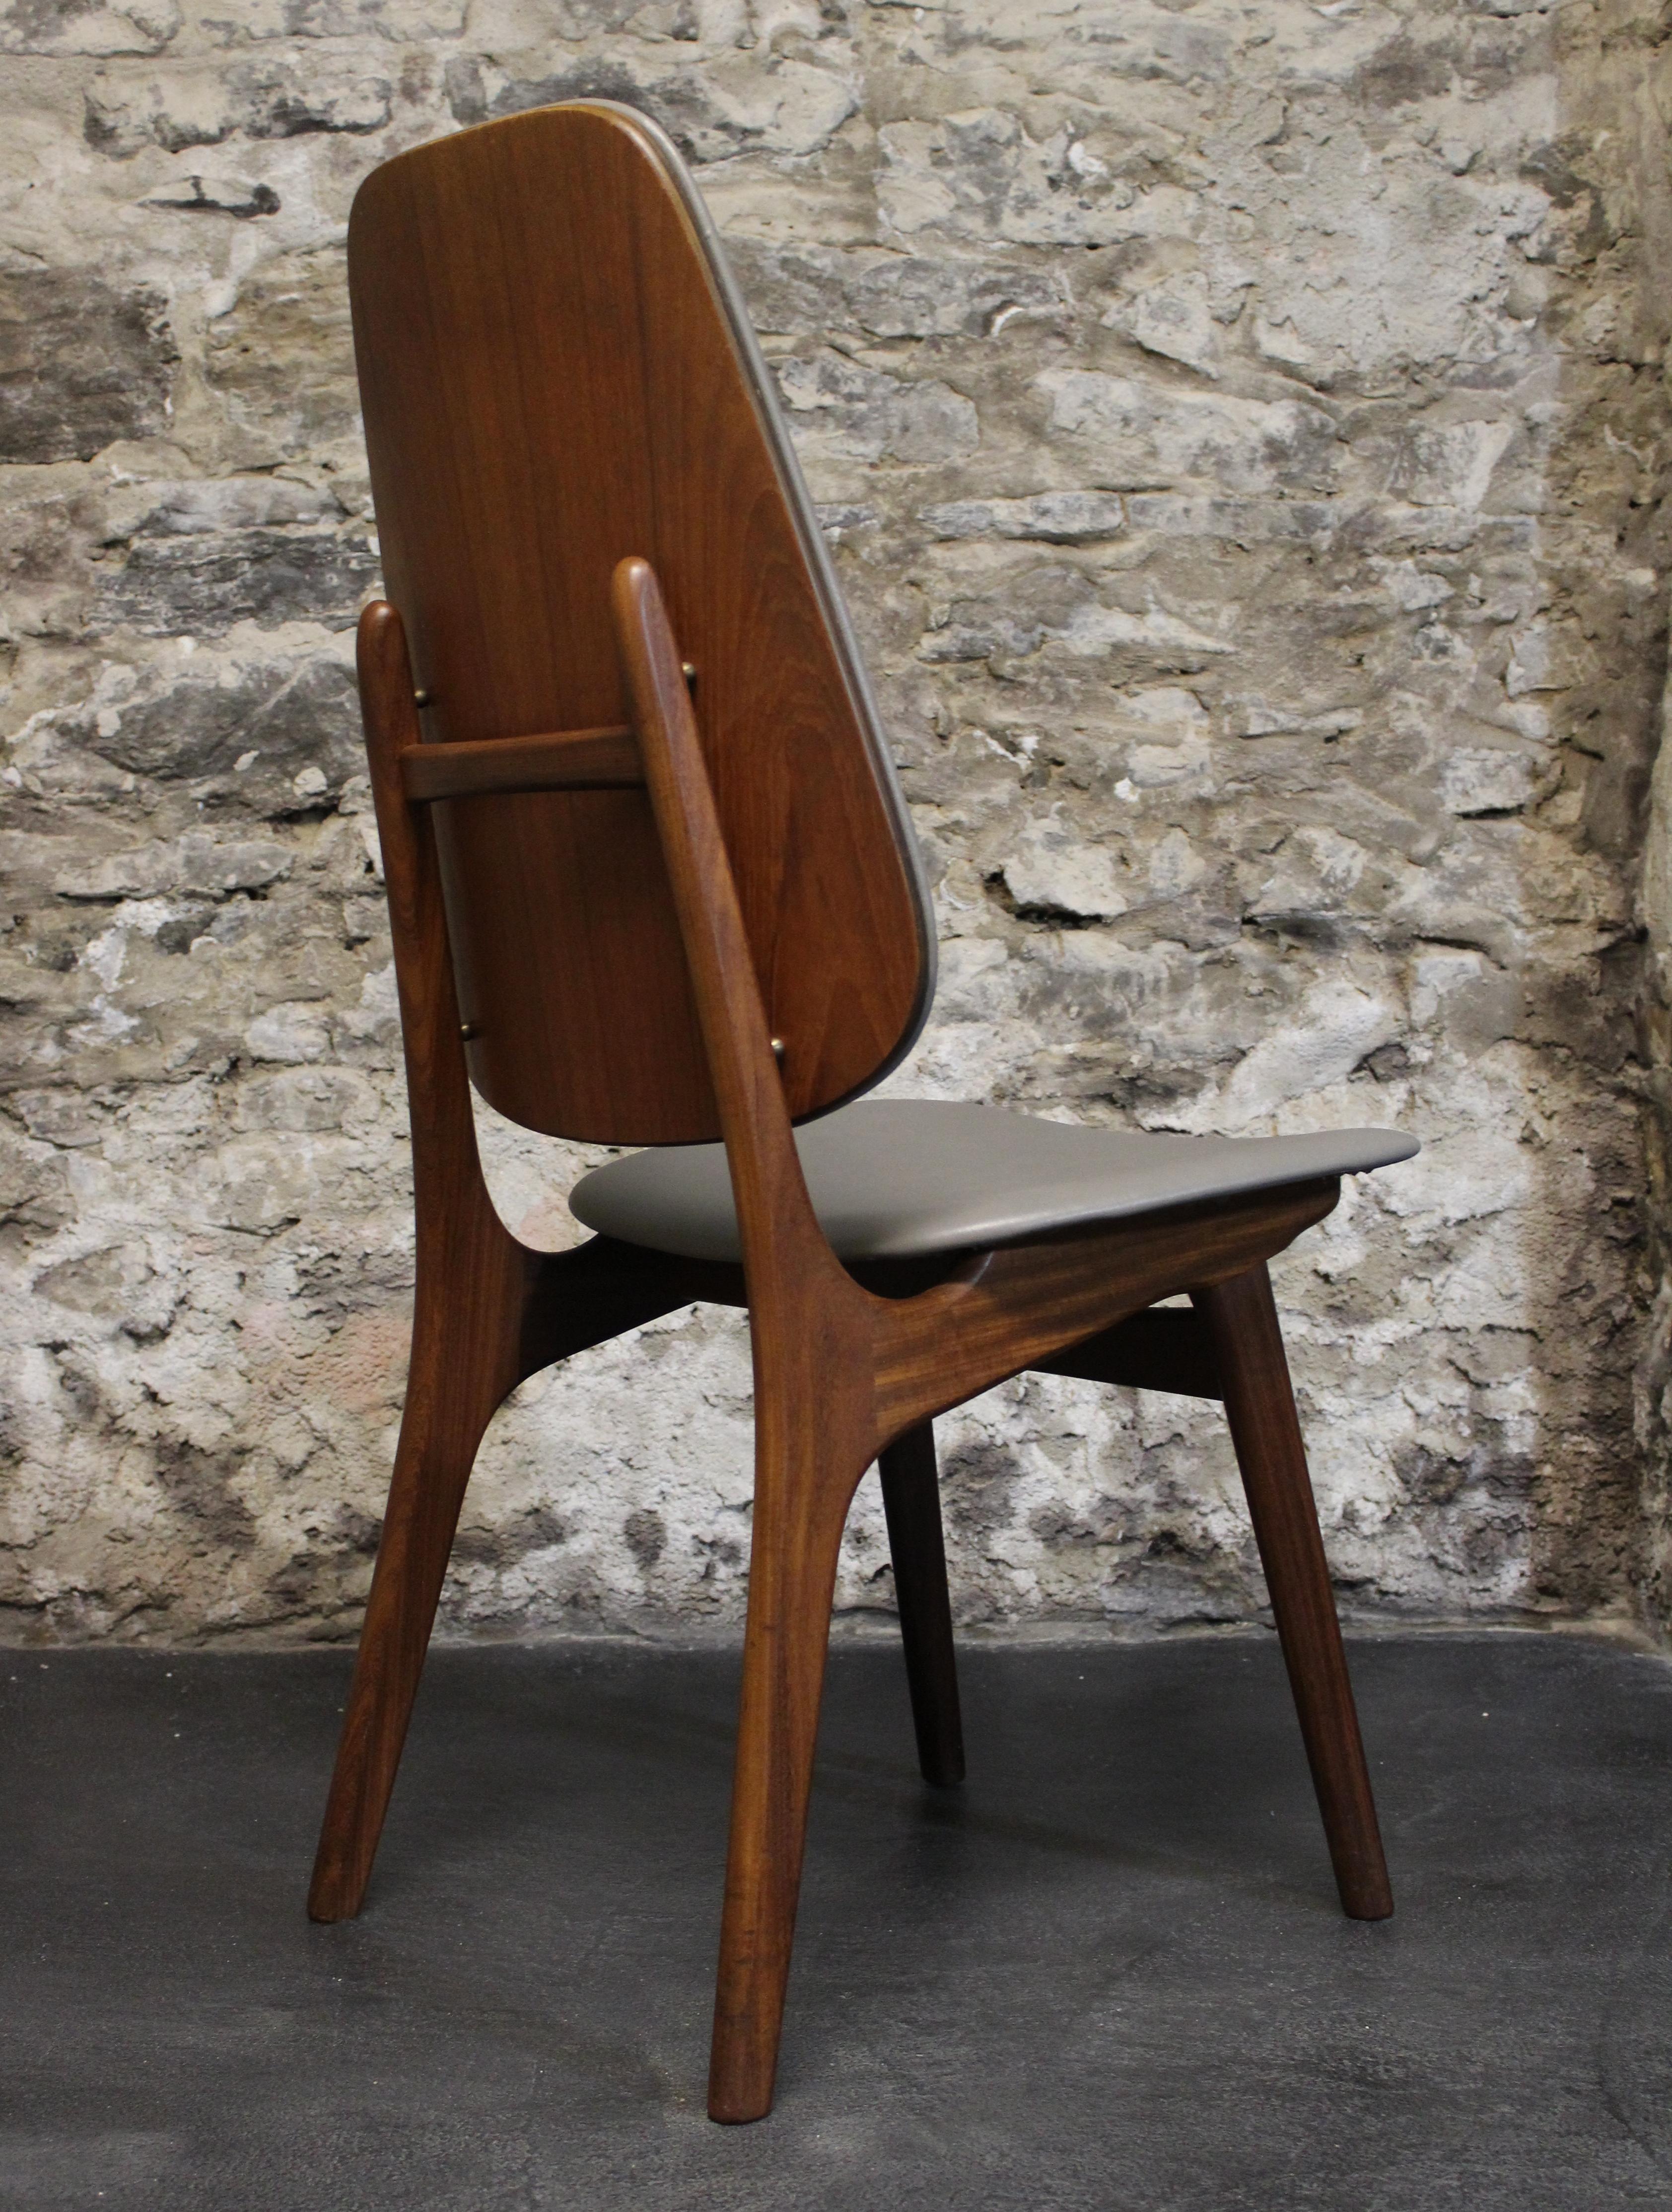 20th Century Six Arne Hovmand-Olsen Danish Teak Dining Chairs with Leather Upholstery